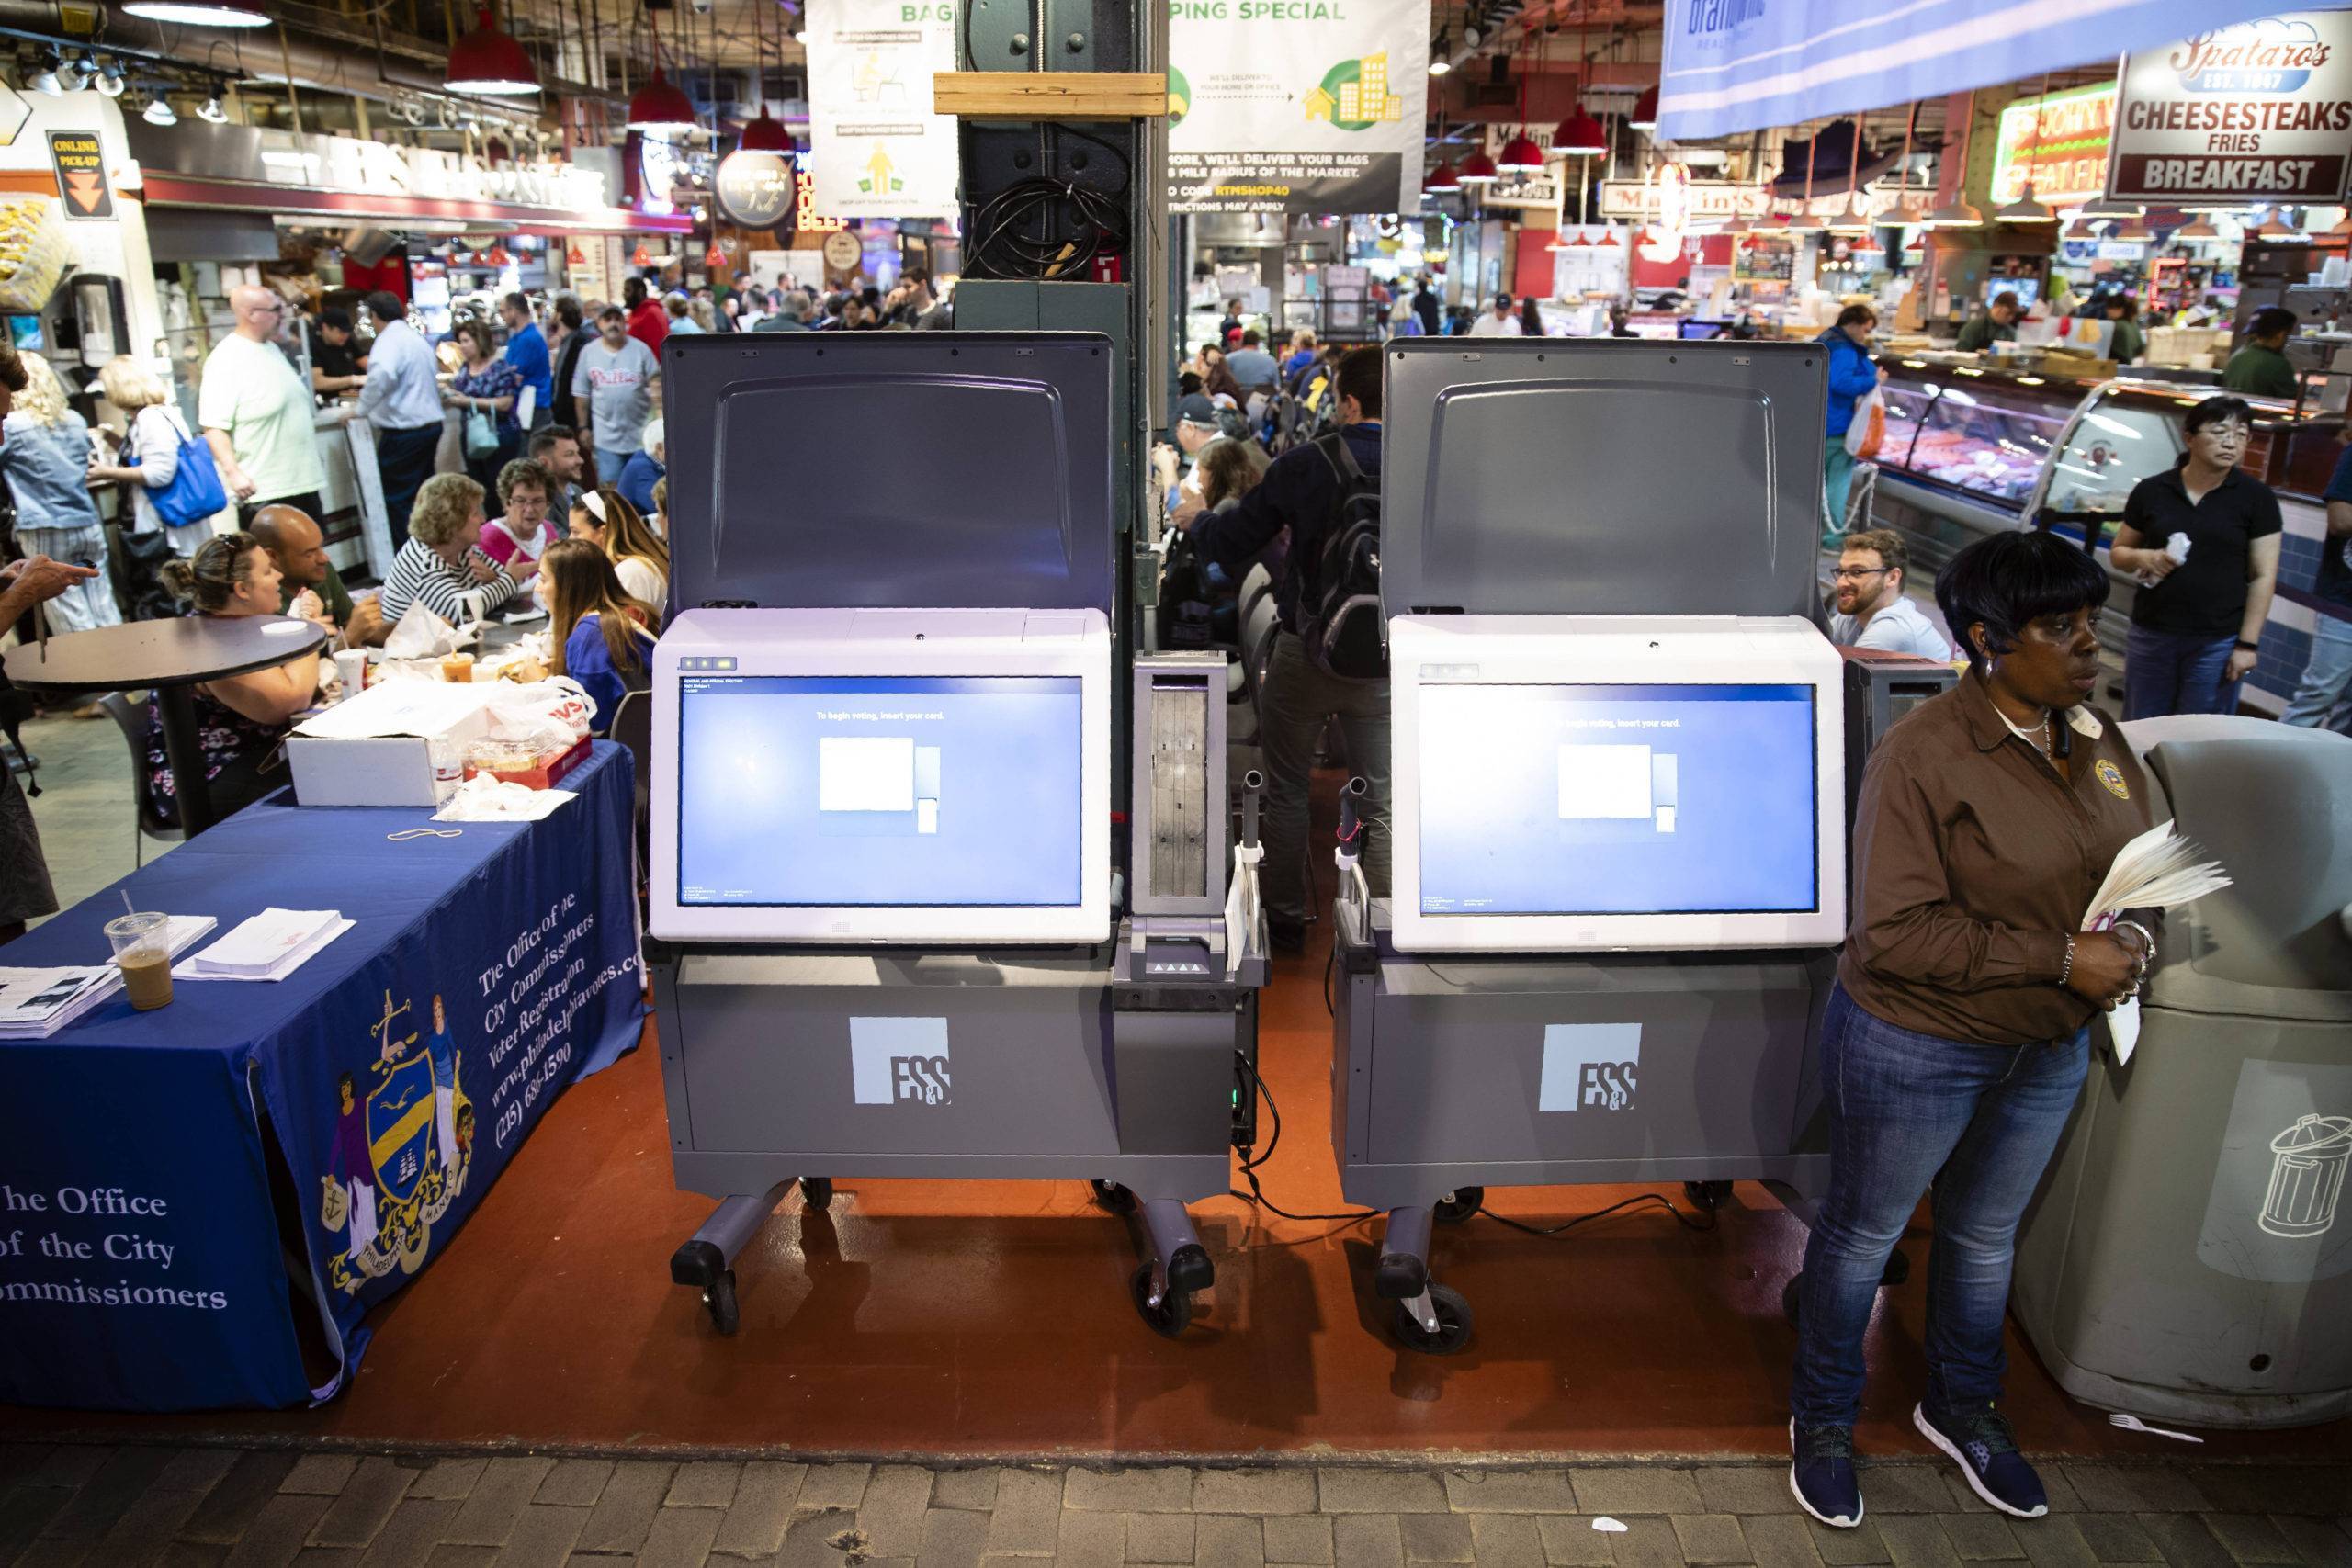 FILE - In this June 13, 2019, file photo, ExpressVote XL voting machines are displayed during a demonstration at the Reading Terminal Market in Philadelphia. More than one in ten voters could vote on paperless voting machines in the 2020 general election, according to a new analysis, leaving their ballots vulnerable to hacking according to a new study. (AP Photo/Matt Rourke, File)/WX203/19225092098772/A JUNE 13, 2019, FILE PHOTO/1908131210